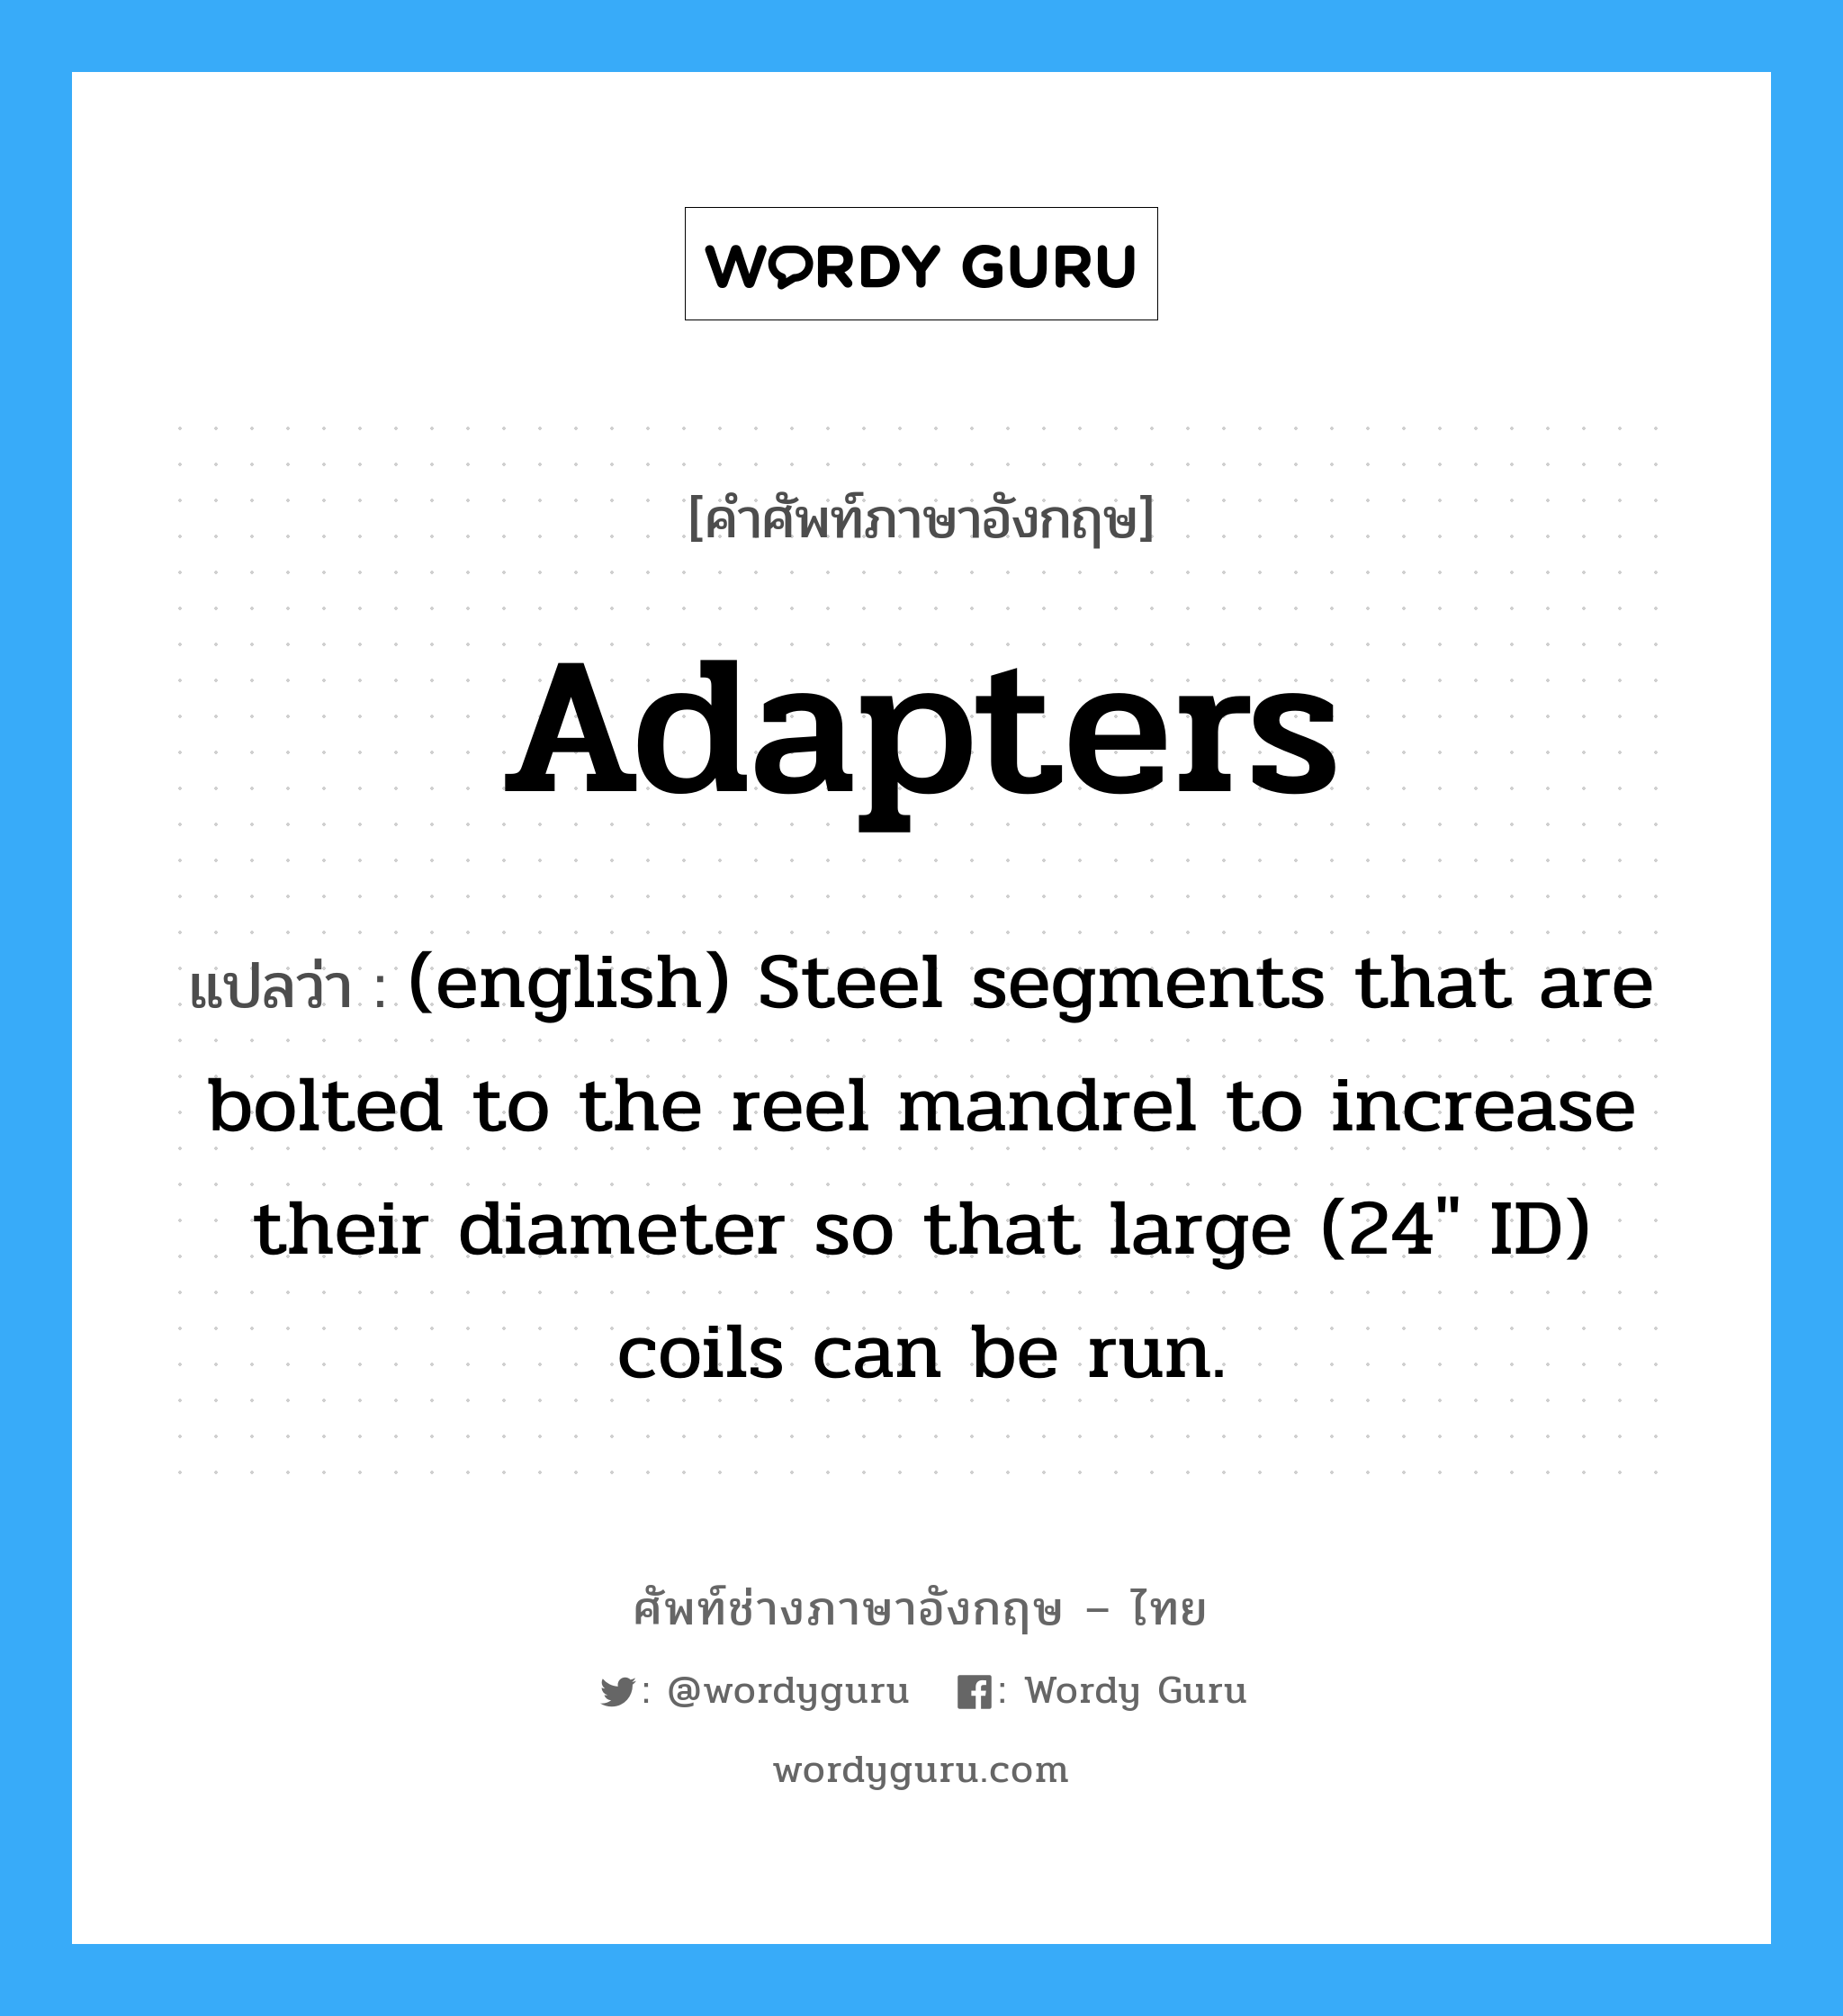 Adapters แปลว่า?, คำศัพท์ช่างภาษาอังกฤษ - ไทย Adapters คำศัพท์ภาษาอังกฤษ Adapters แปลว่า (english) Steel segments that are bolted to the reel mandrel to increase their diameter so that large (24" ID) coils can be run.